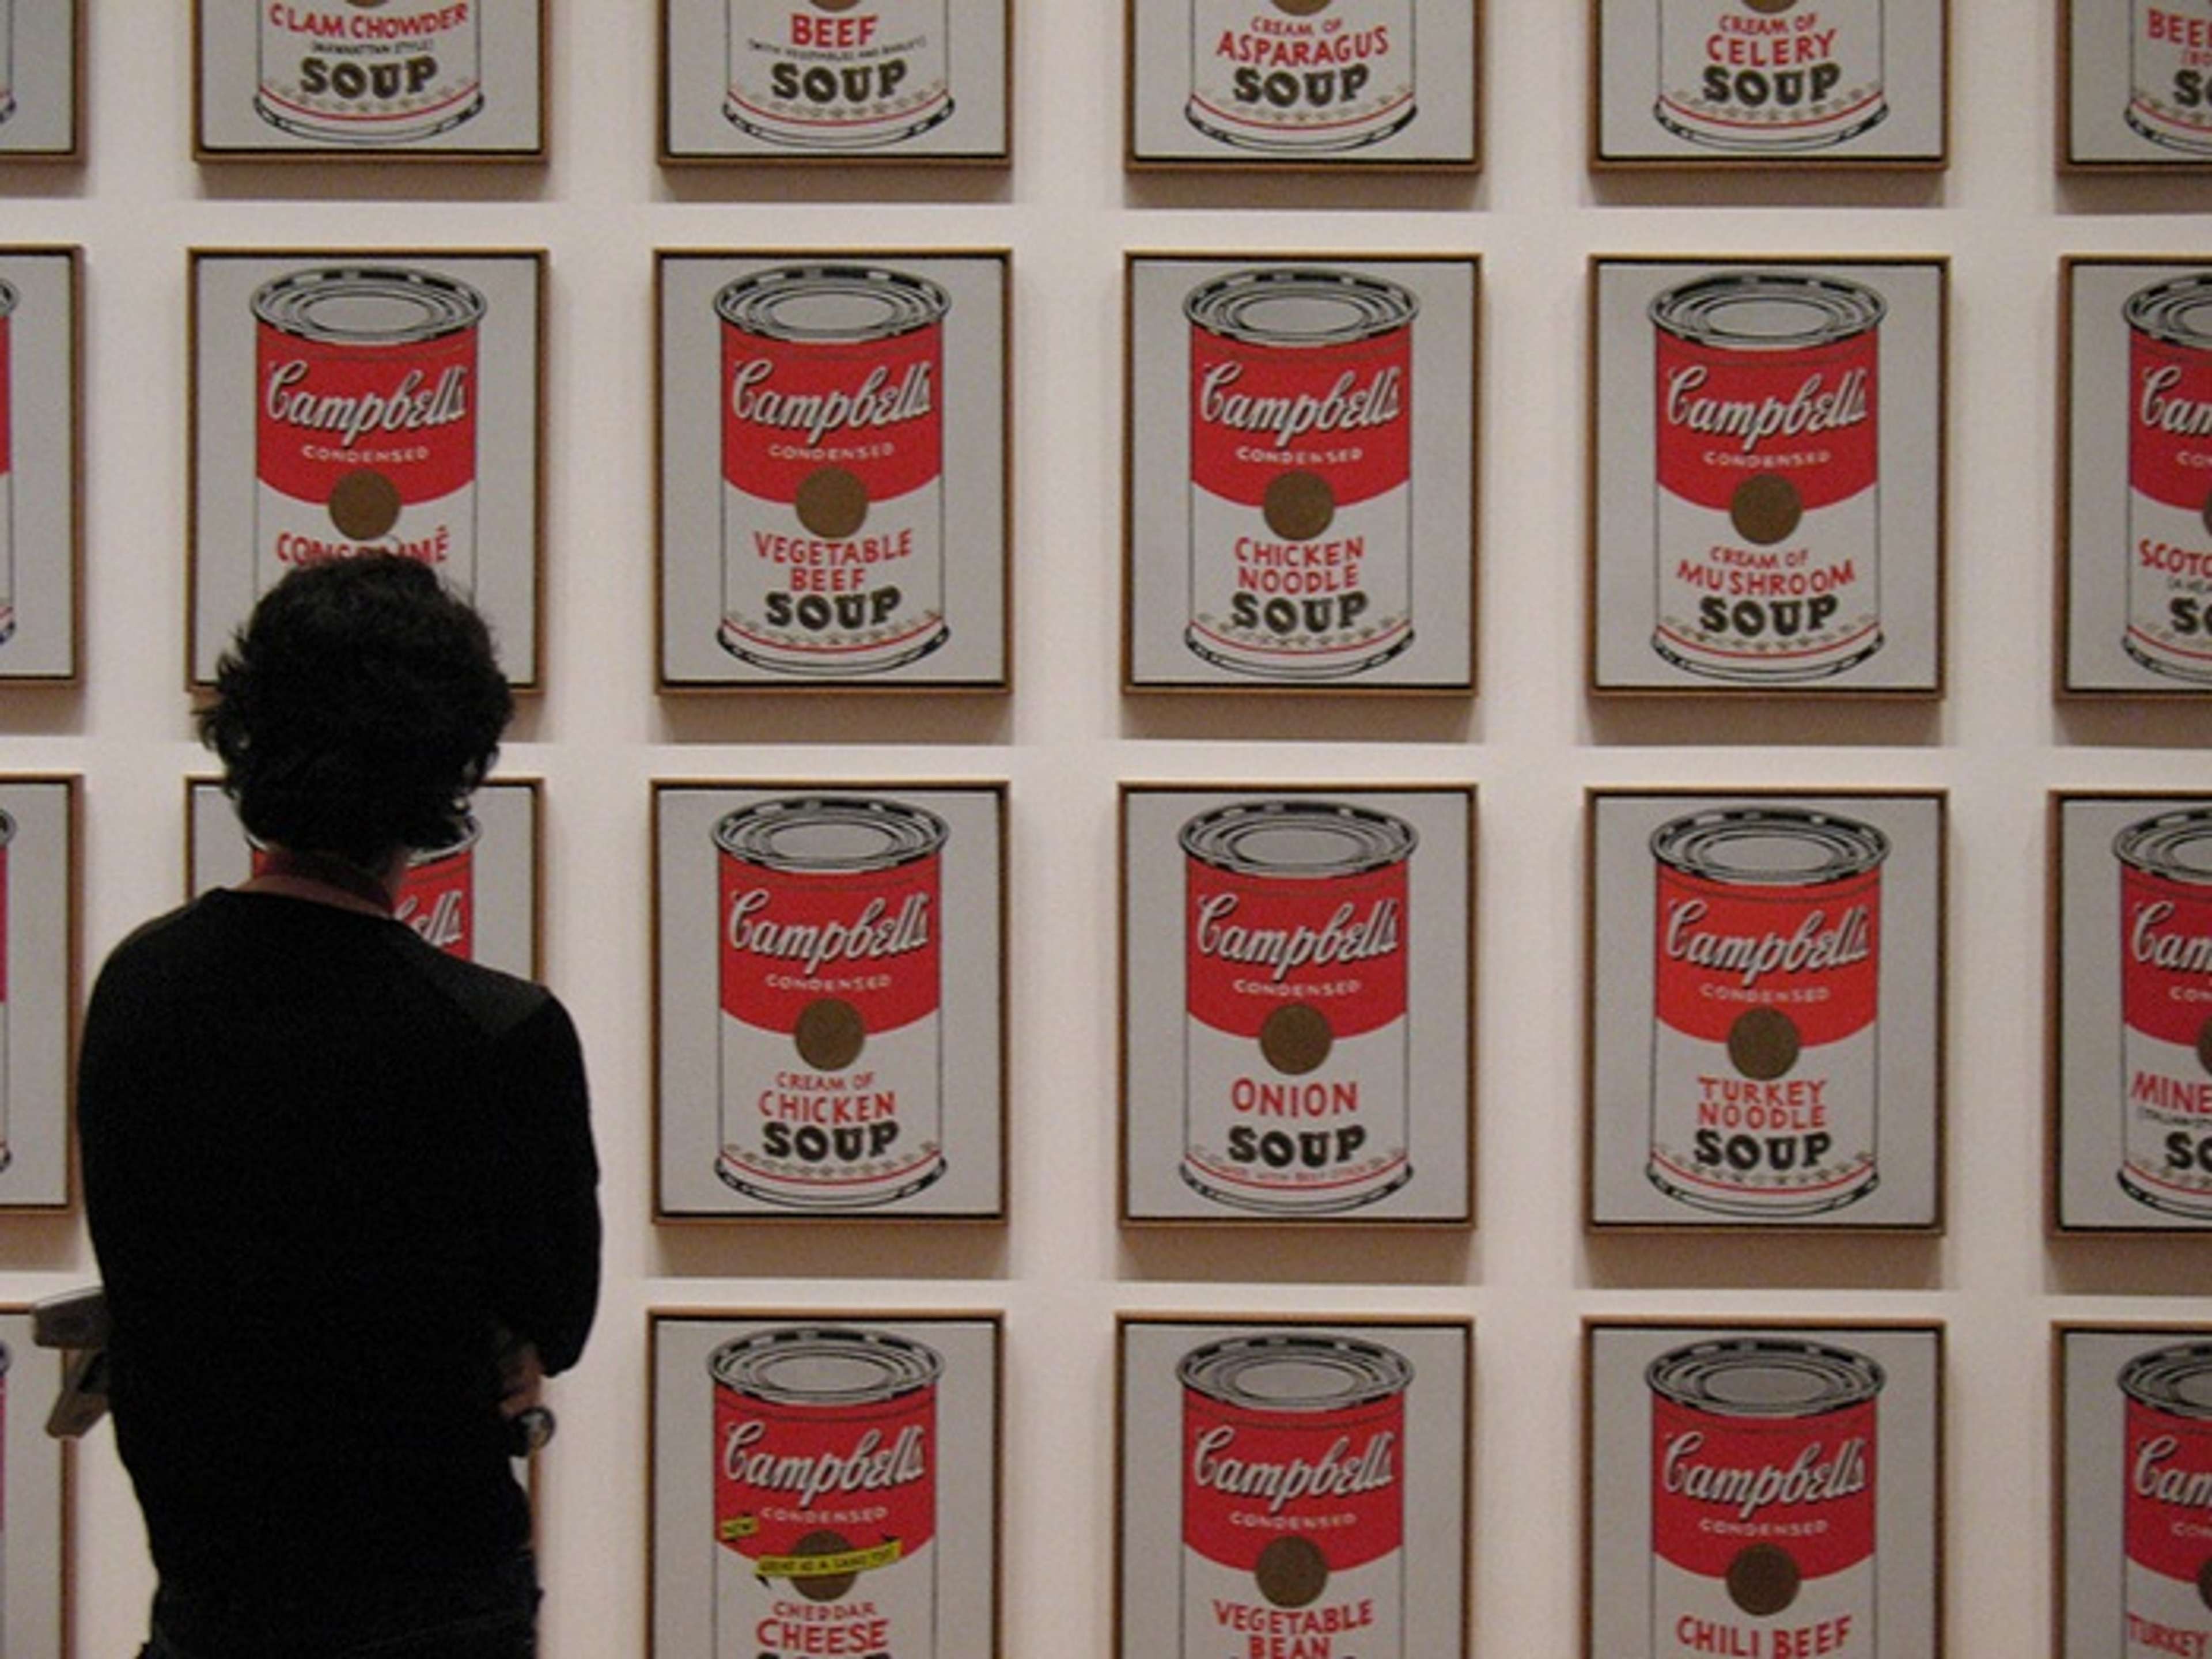 Warhol’s Campbell’s Soup Canvases by Andy Warhol - © Photograph by Sarah Ross via Creative Commons